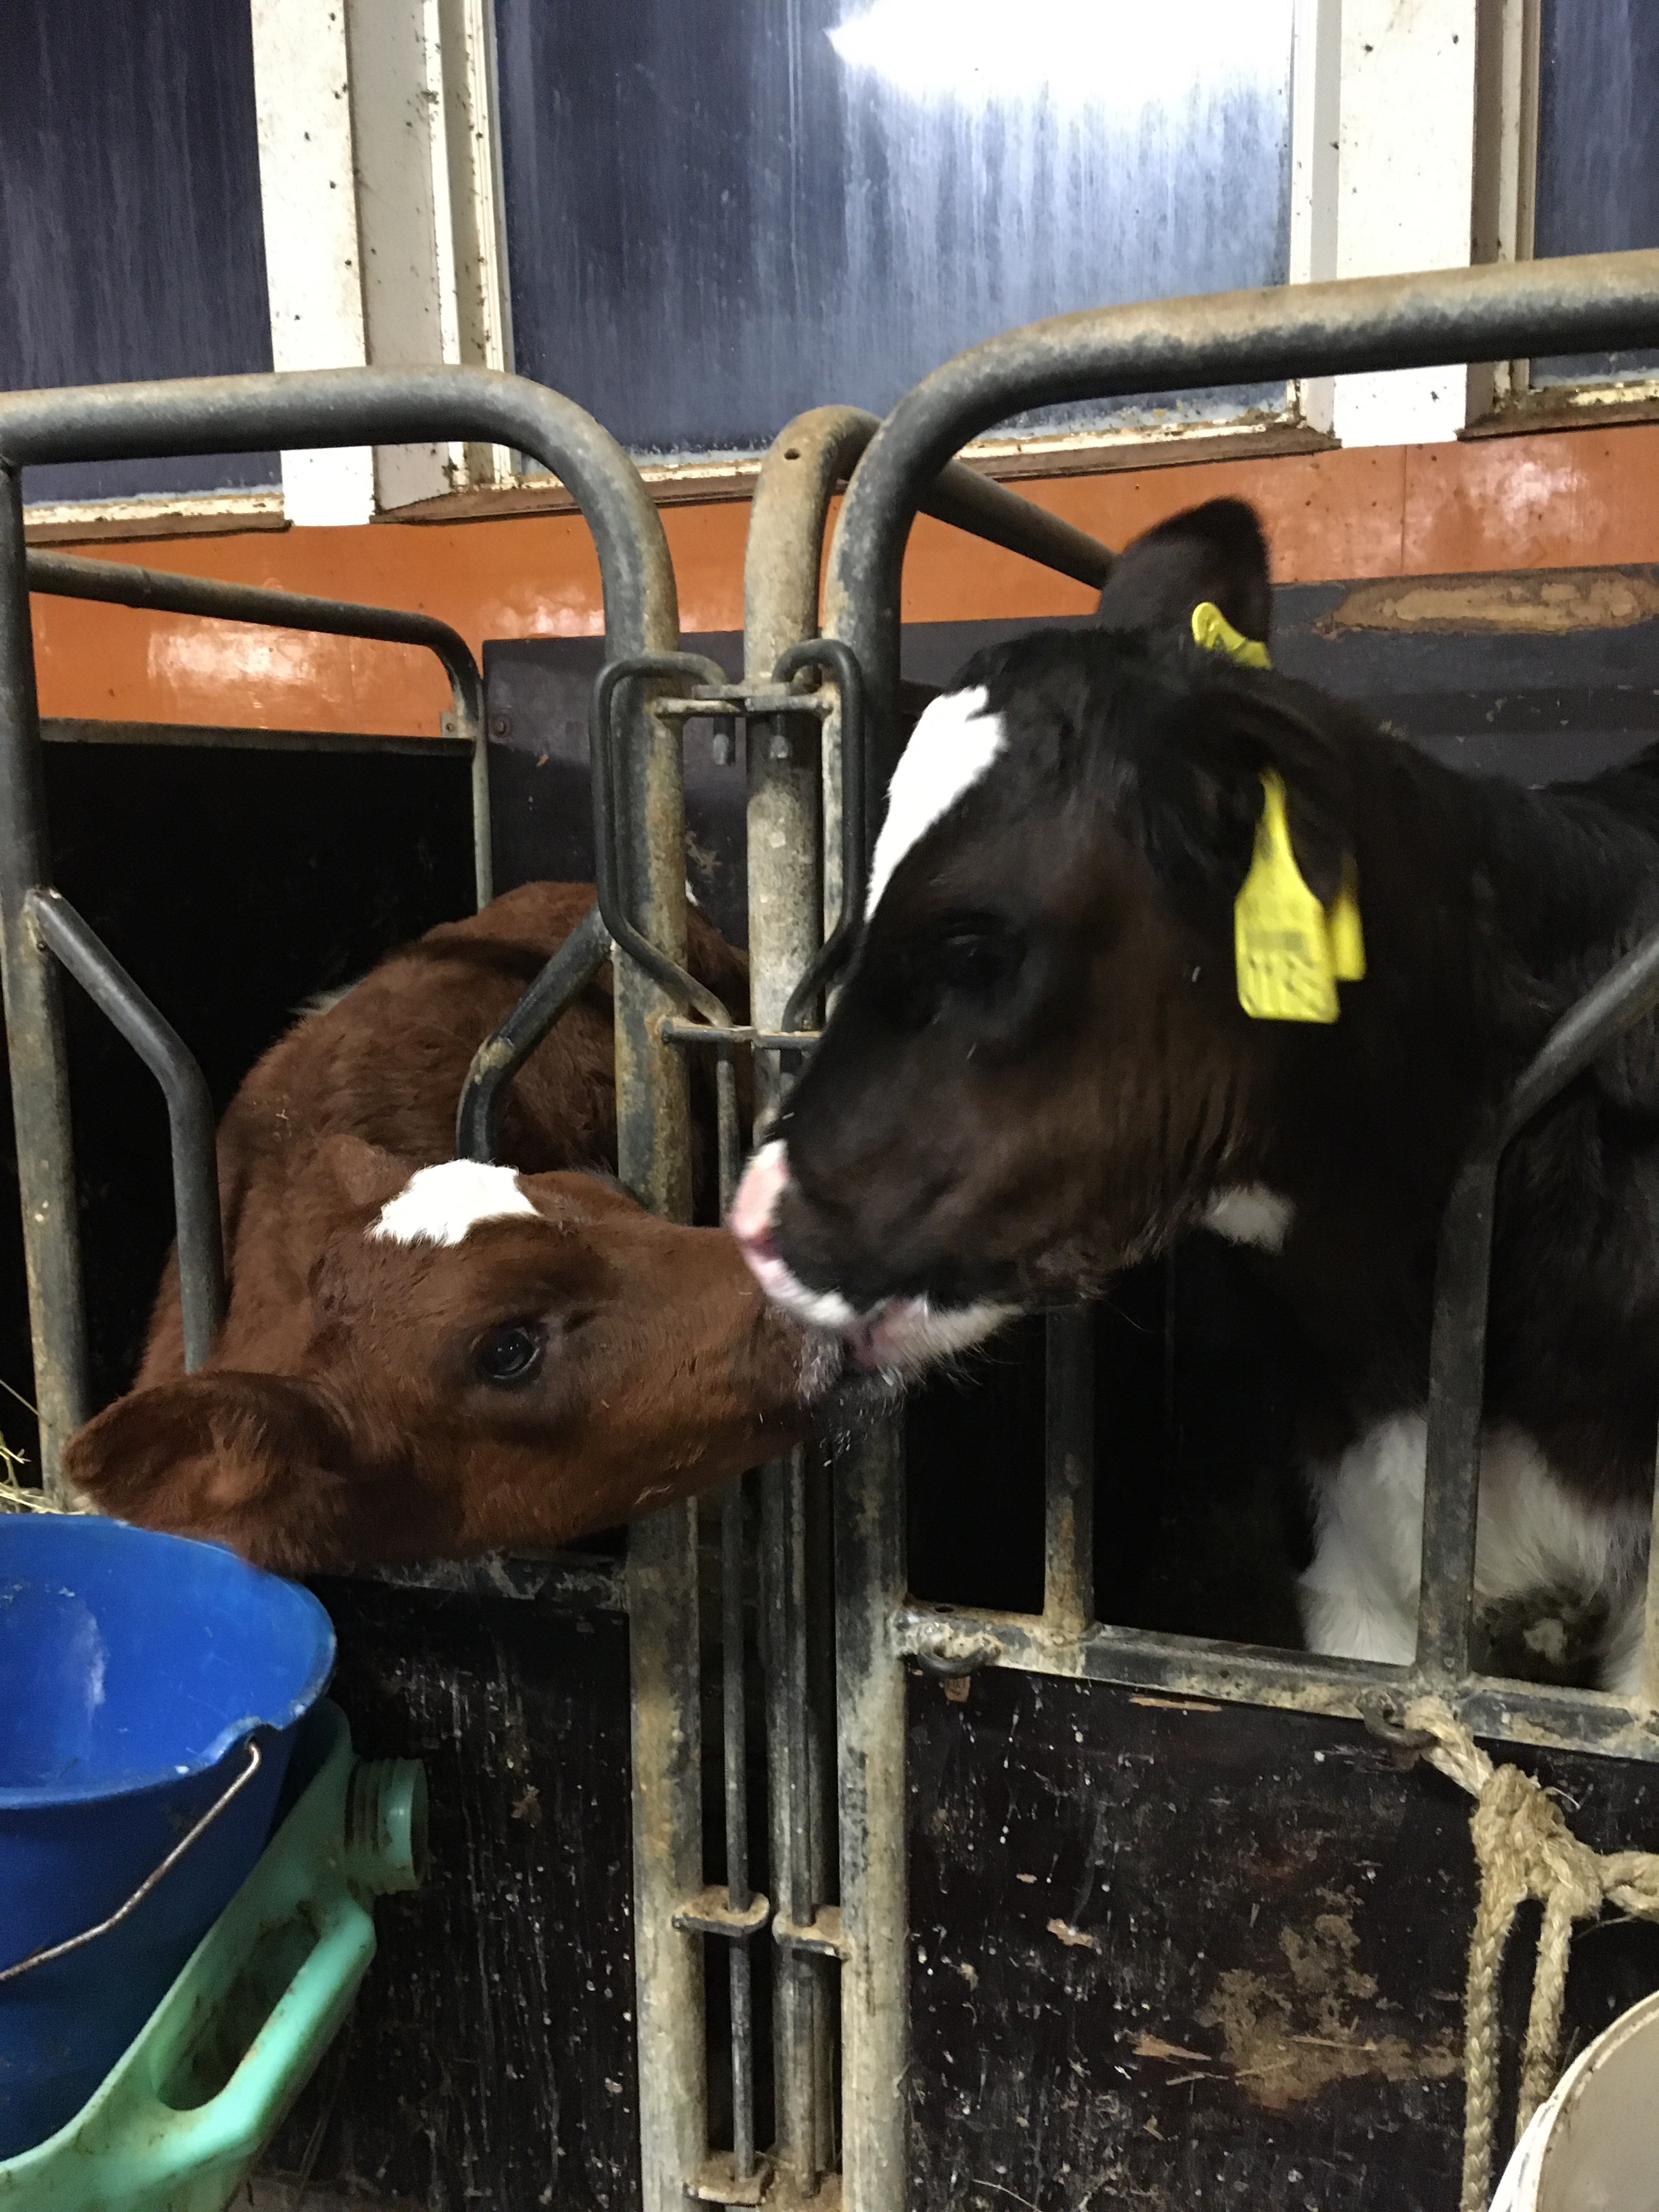 Two calves lick each other’s faces in a barn